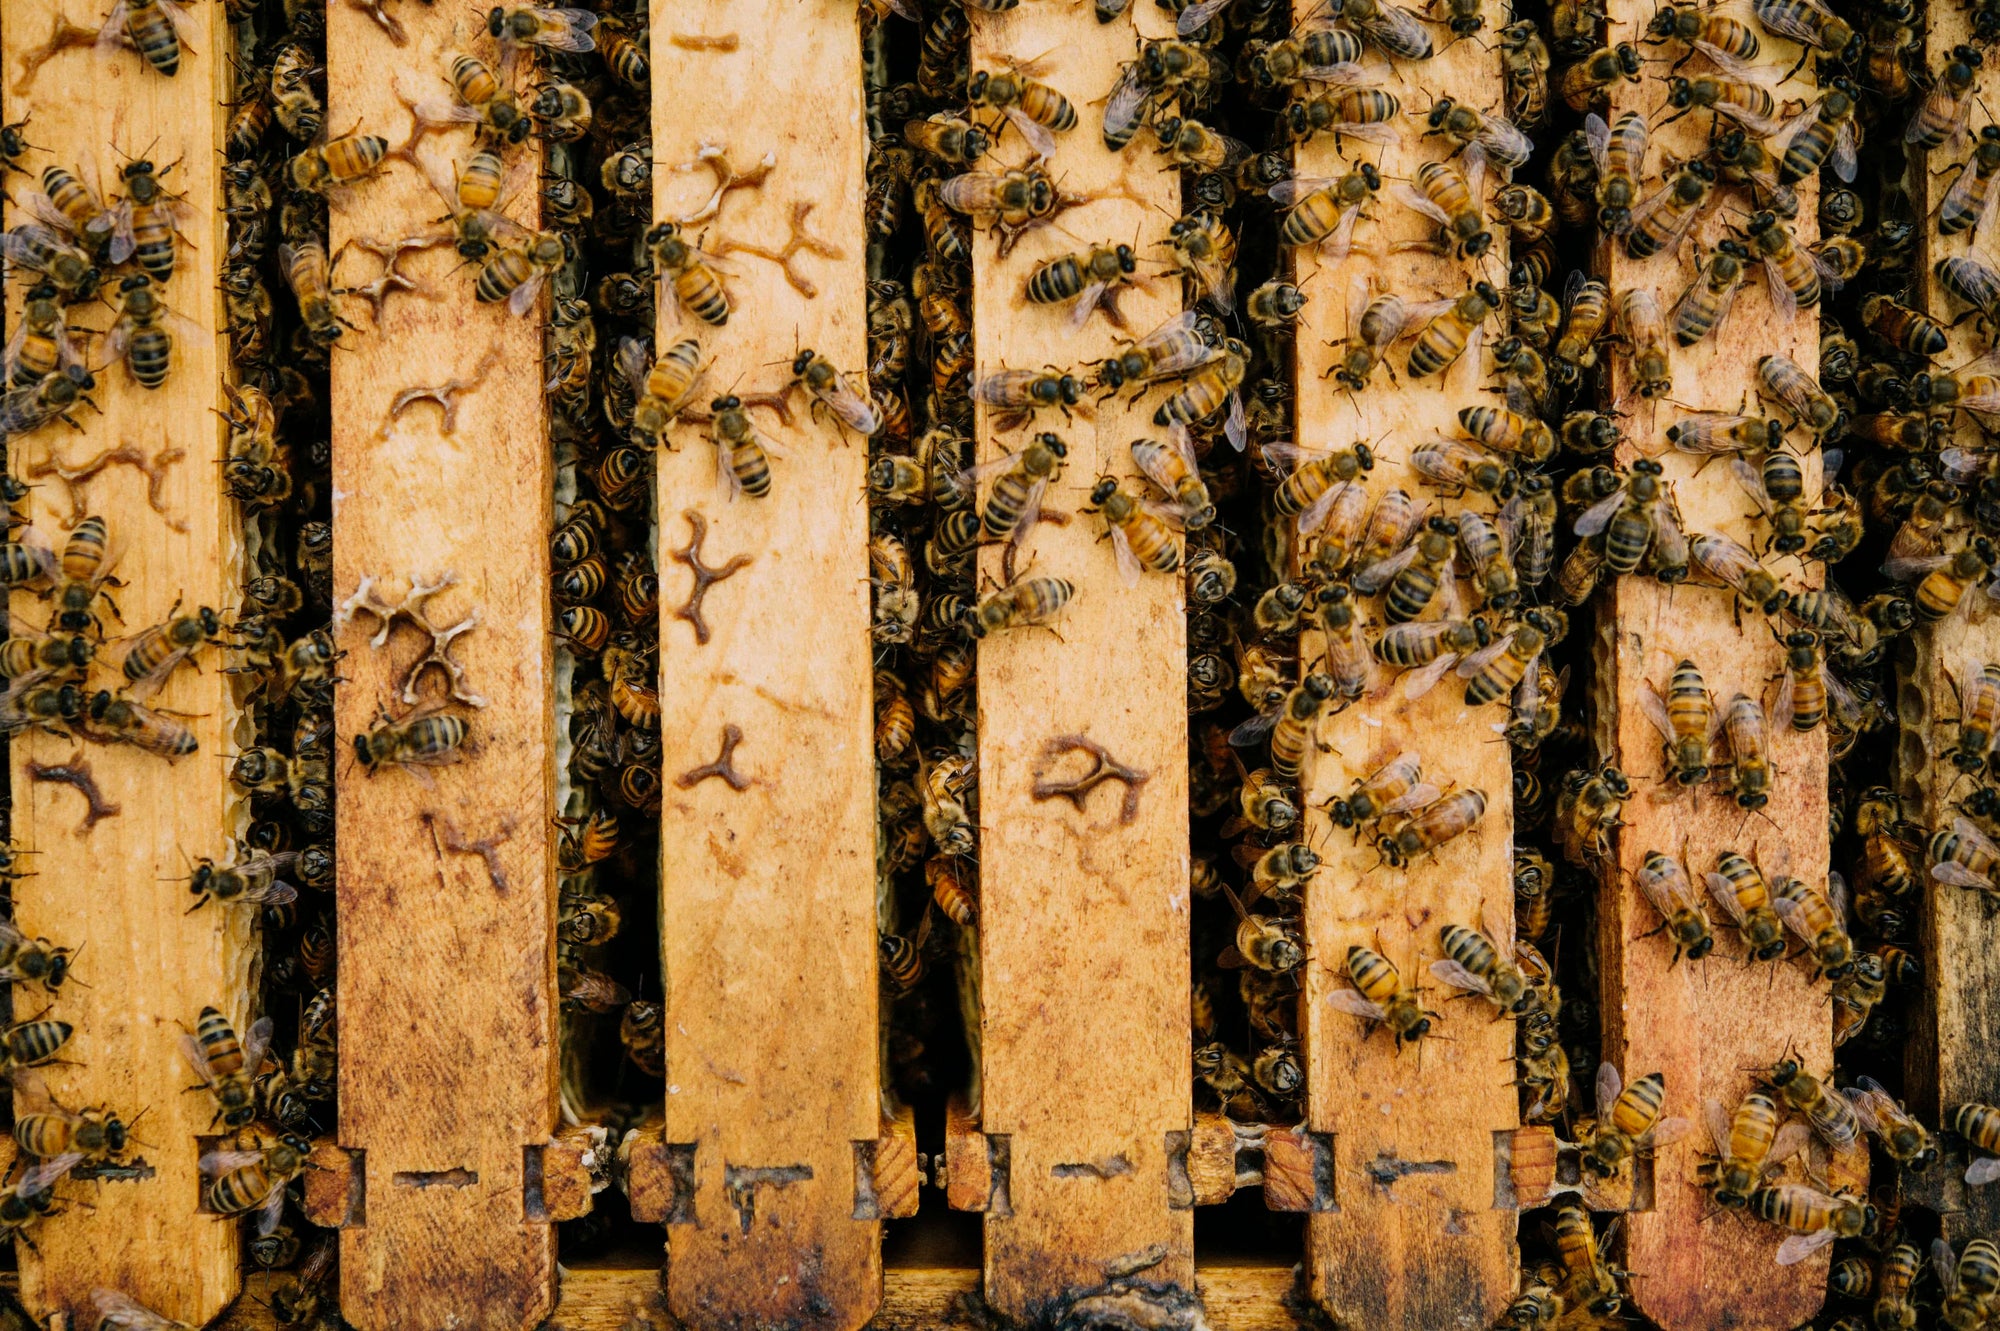 Hundreds of bees